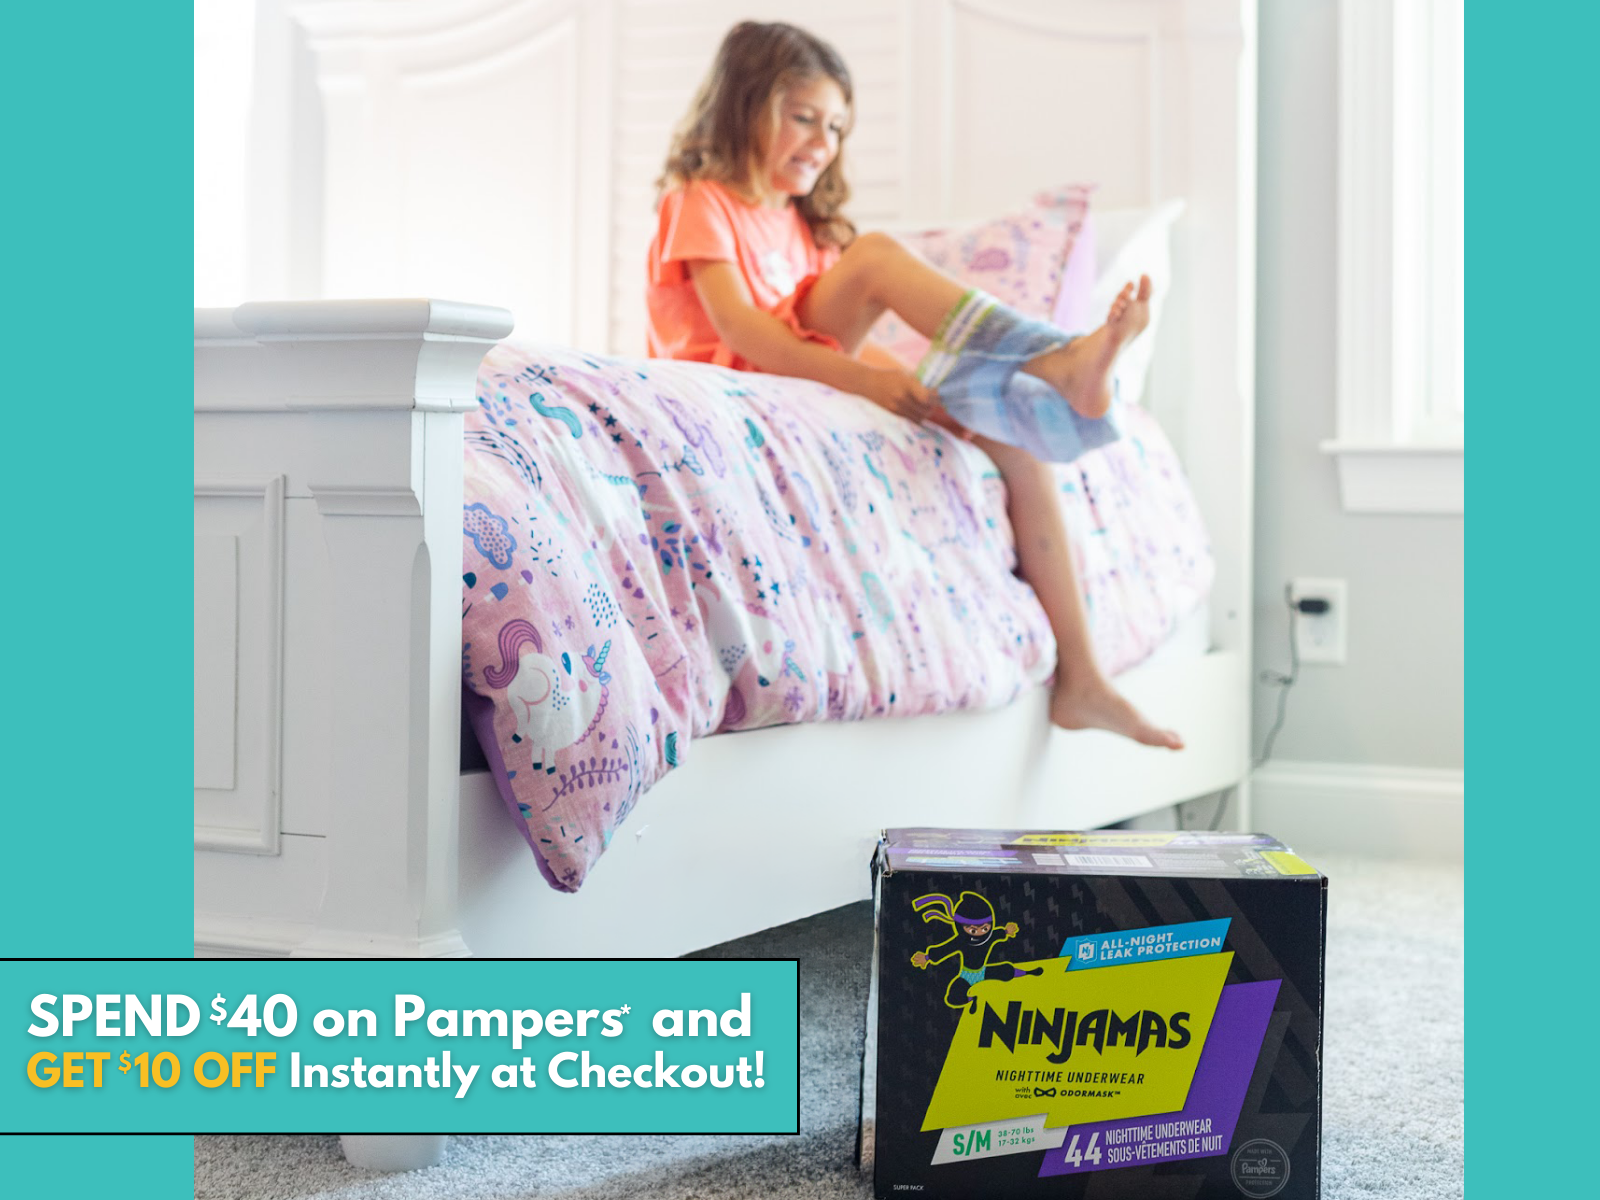 Save $10 On Pampers, Ninjamas And Easy Ups Products At Publix - iHeartPublix